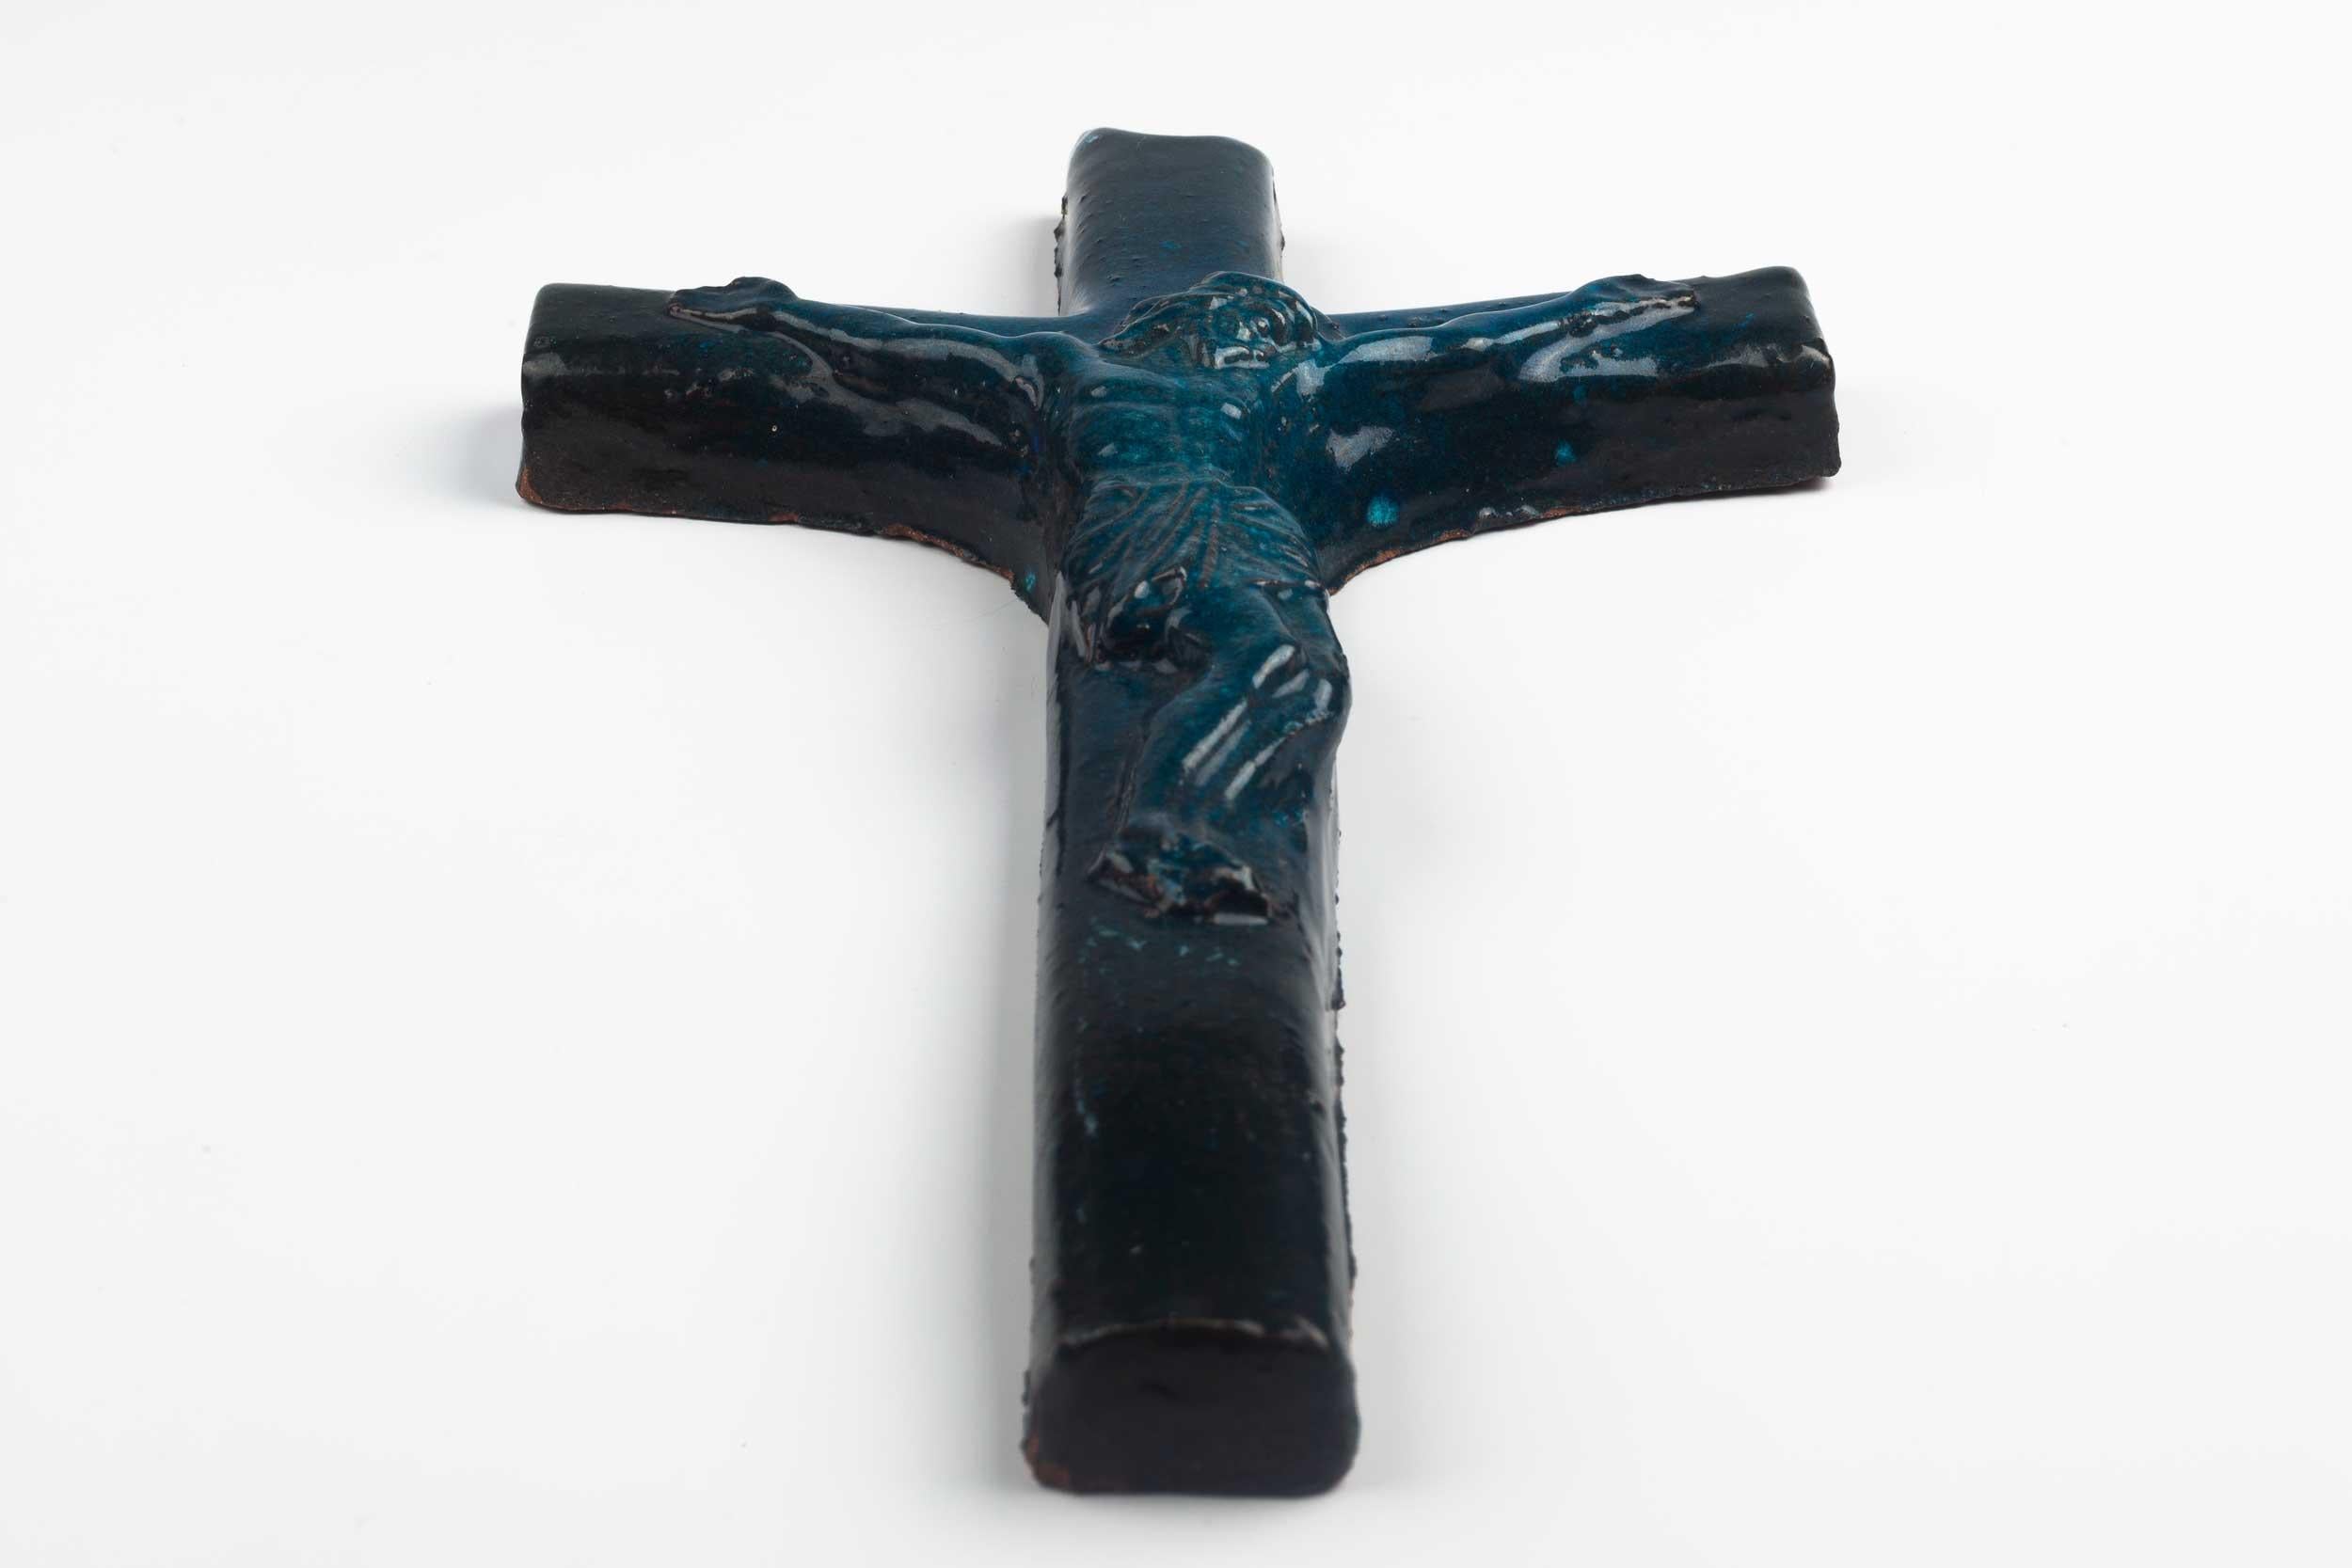 Midcentury European wall cross hand painted in blue and black with detailed christ figure in volume. From a large collection of vintage crosses handmade by Flemish artisans. 

From modernism to brutalism, the crosses in our collection range from